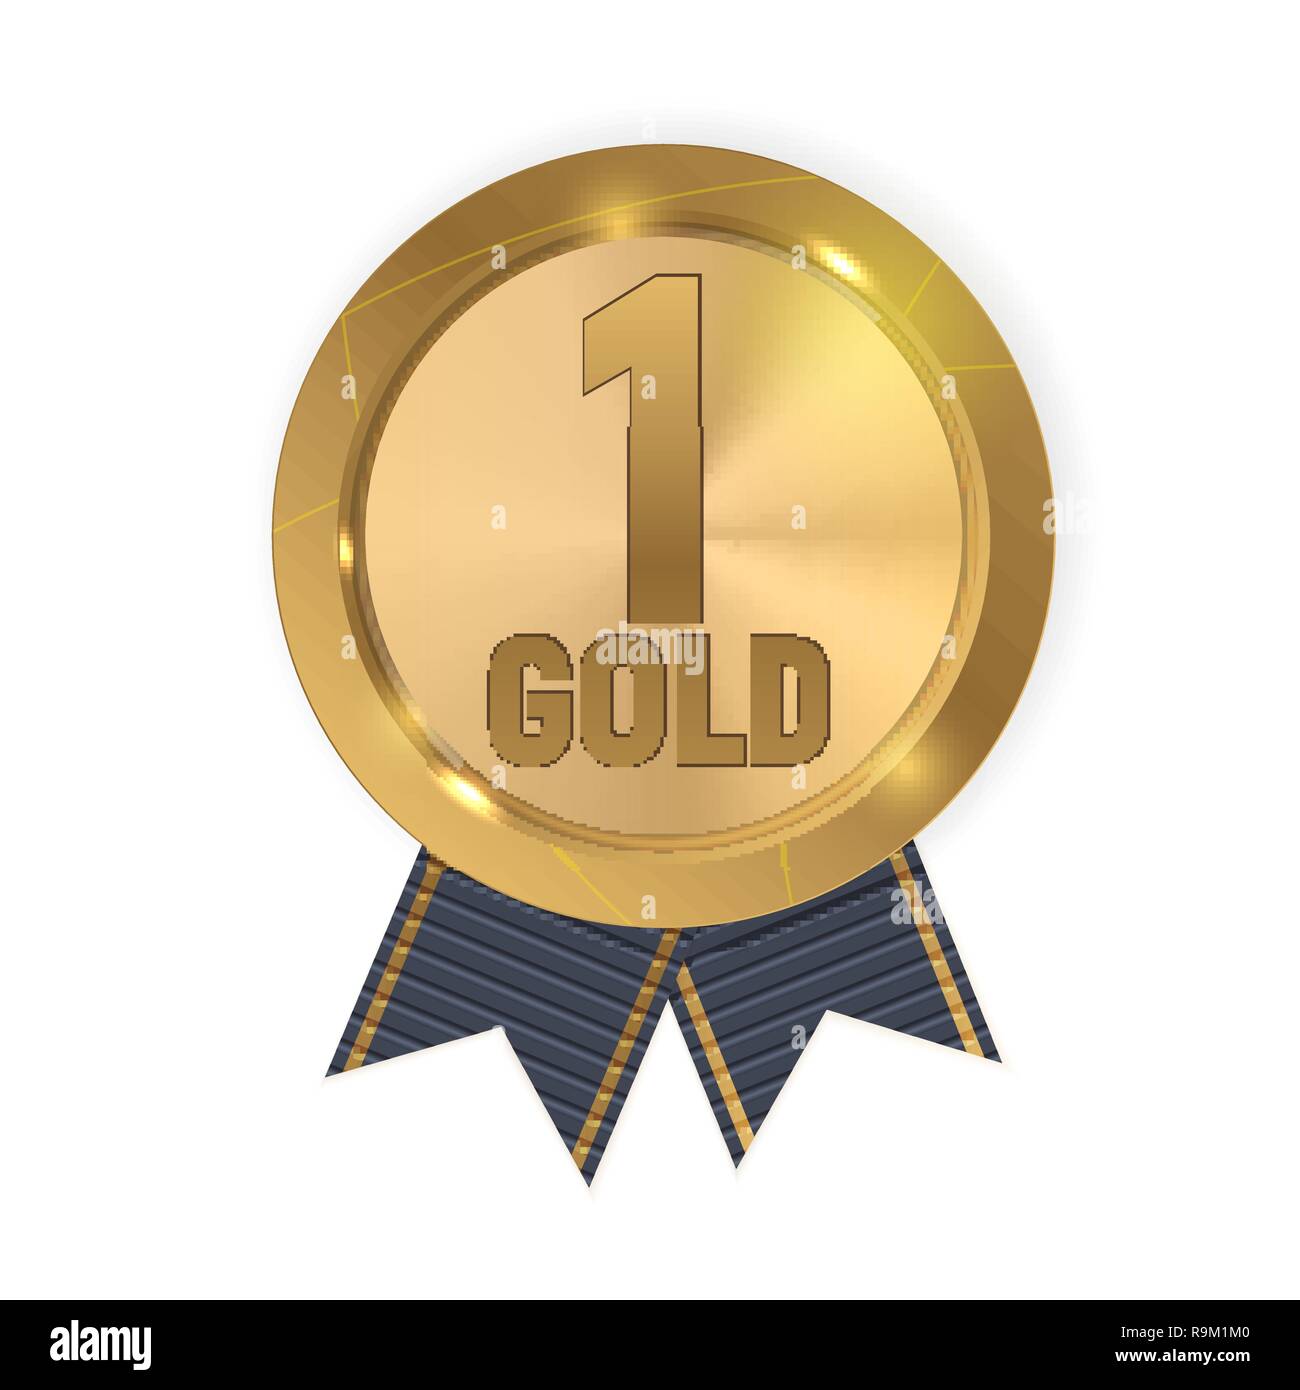 3d illustration of first place blue ribbon over white background Stock  Photo - Alamy